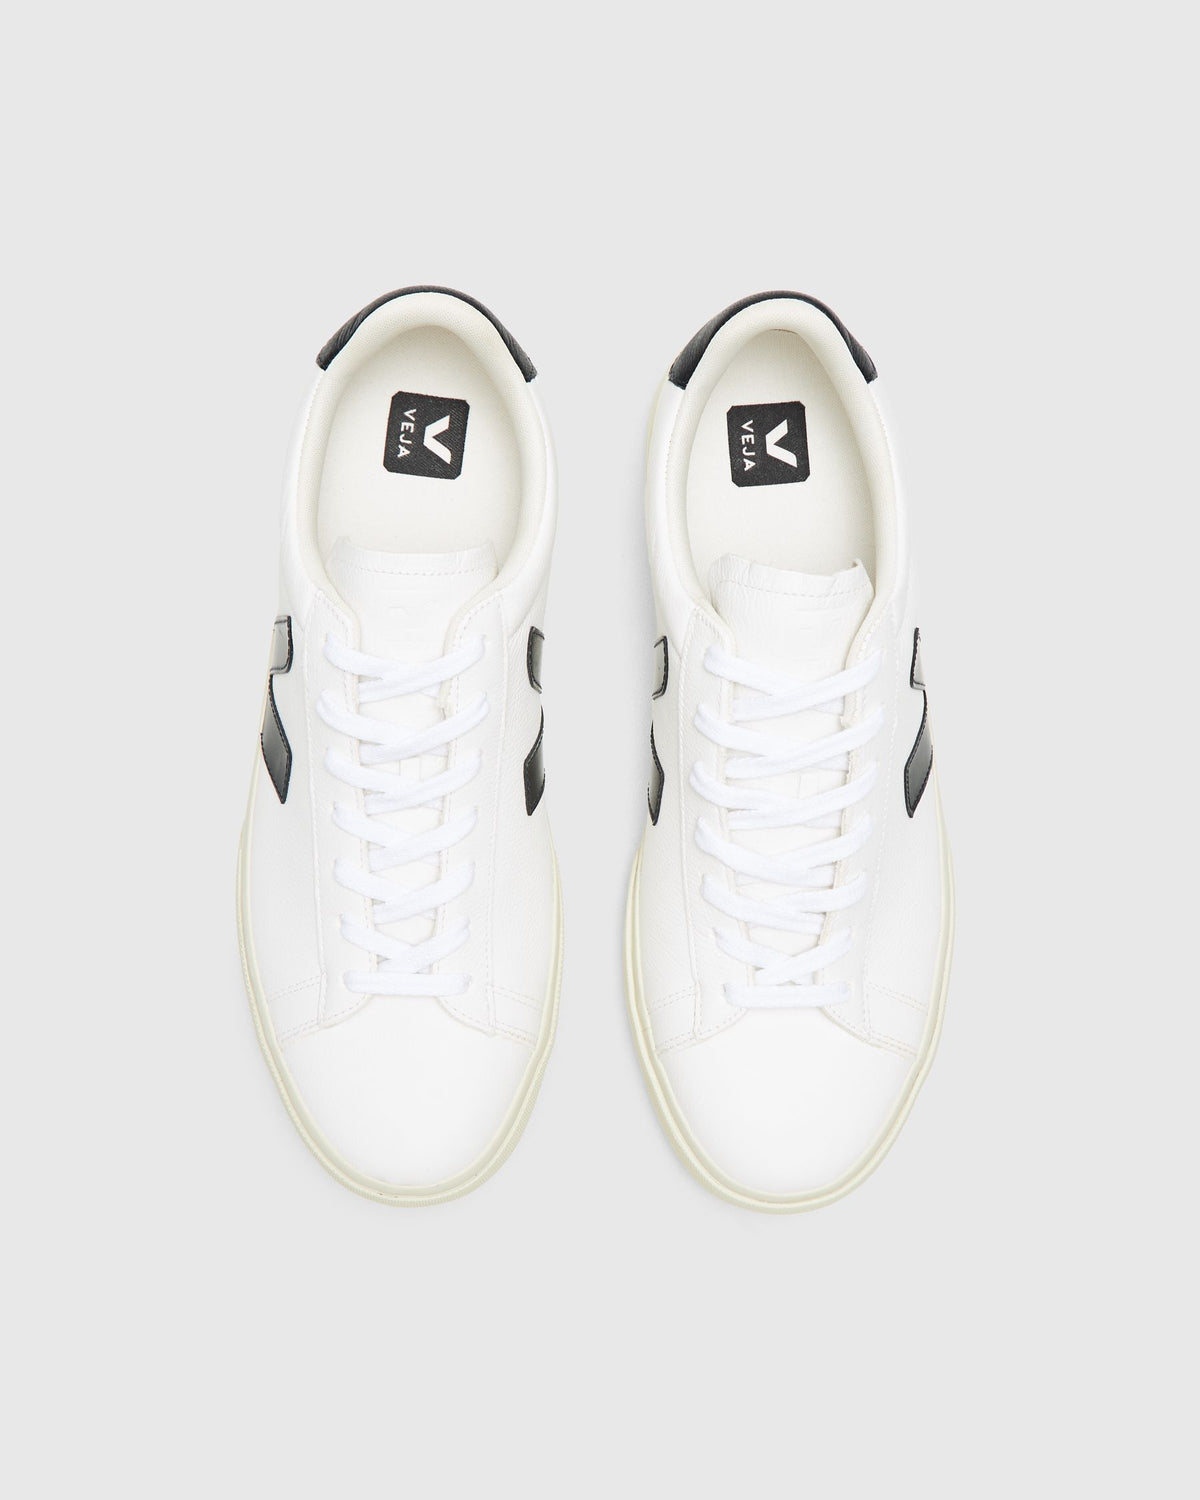 Campo in White/Black Chrome Free Leather